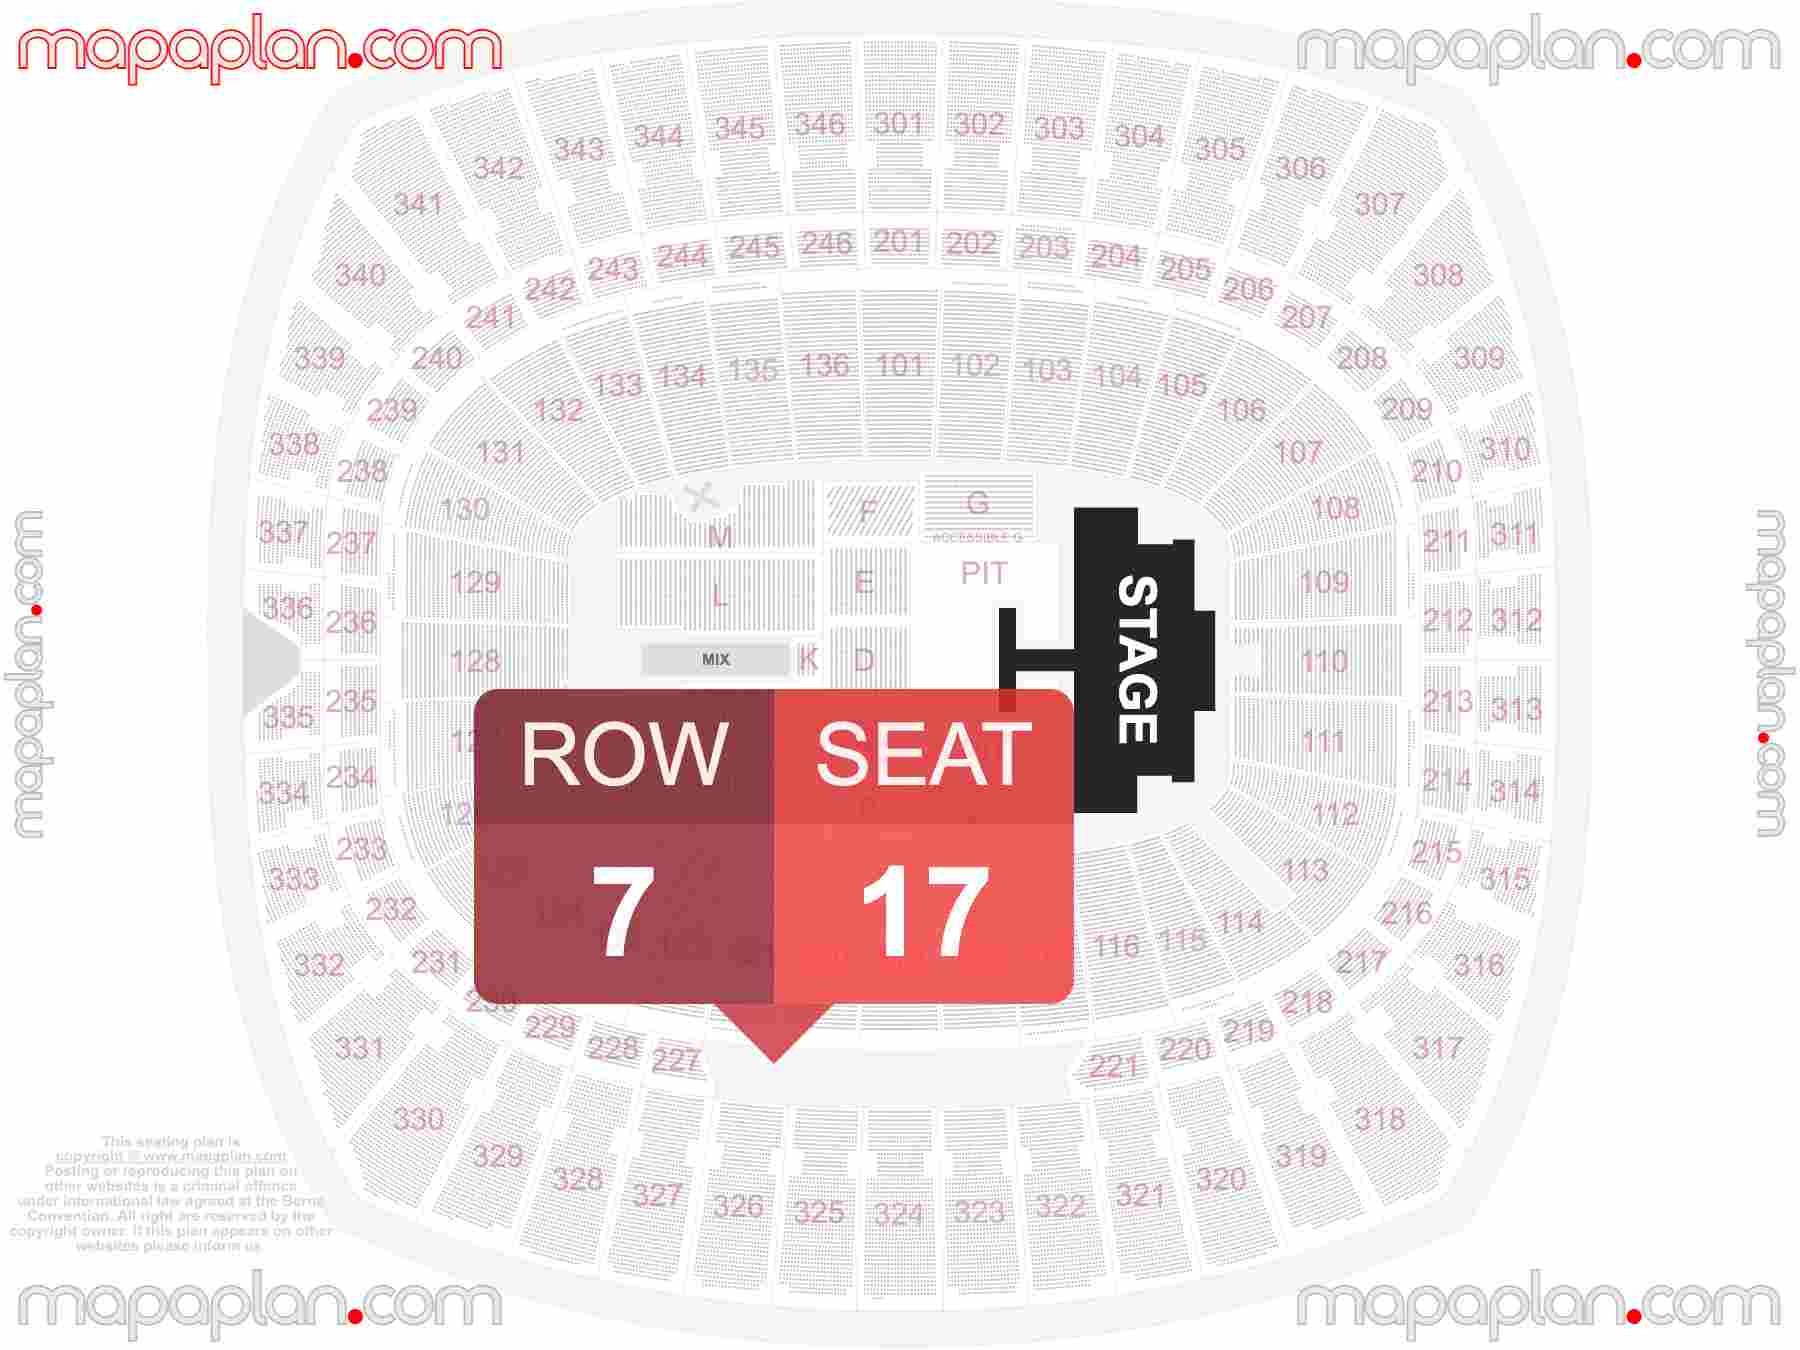 Kansas City GEHA Field Arrowhead Stadium seating chart Concert detailed seat numbers and row numbering chart with interactive map plan layout